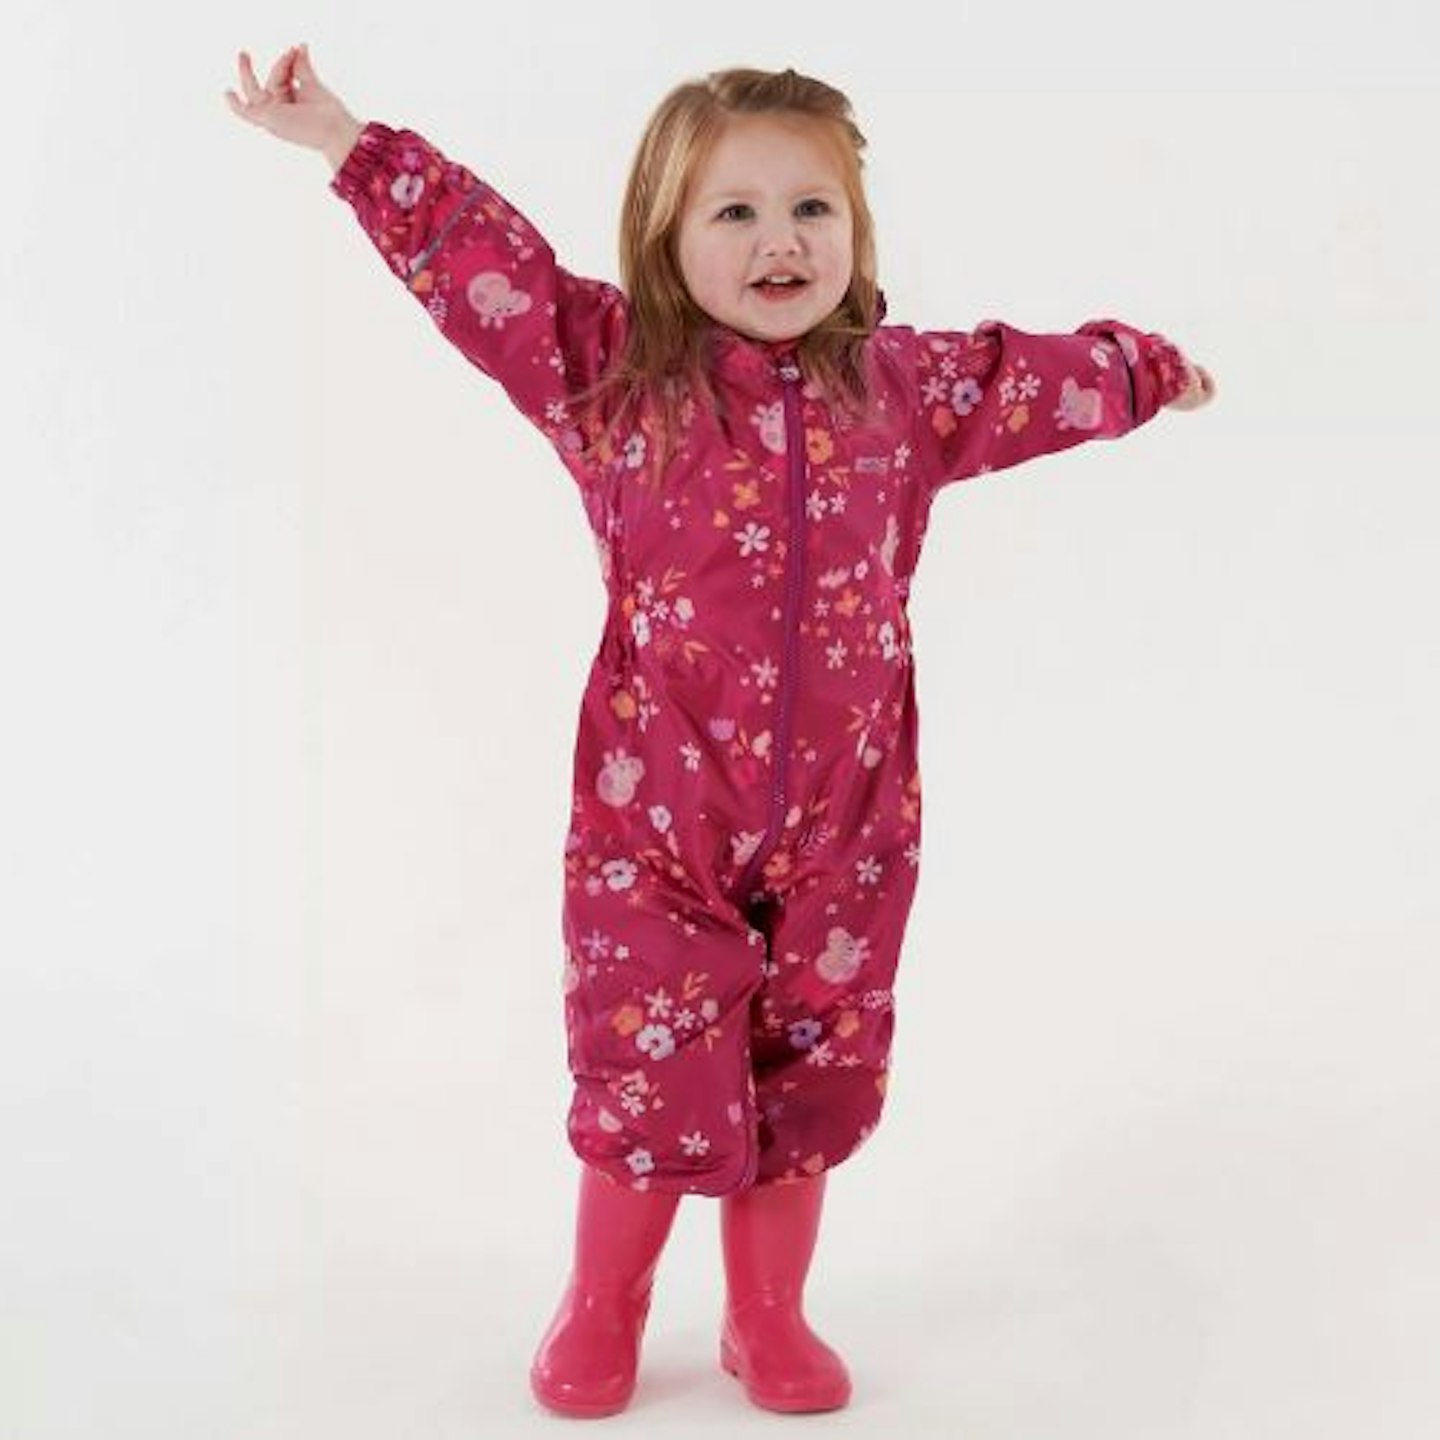 Kids' Peppa Pig Pobble Waterproof Puddle Suit, Berry Pink